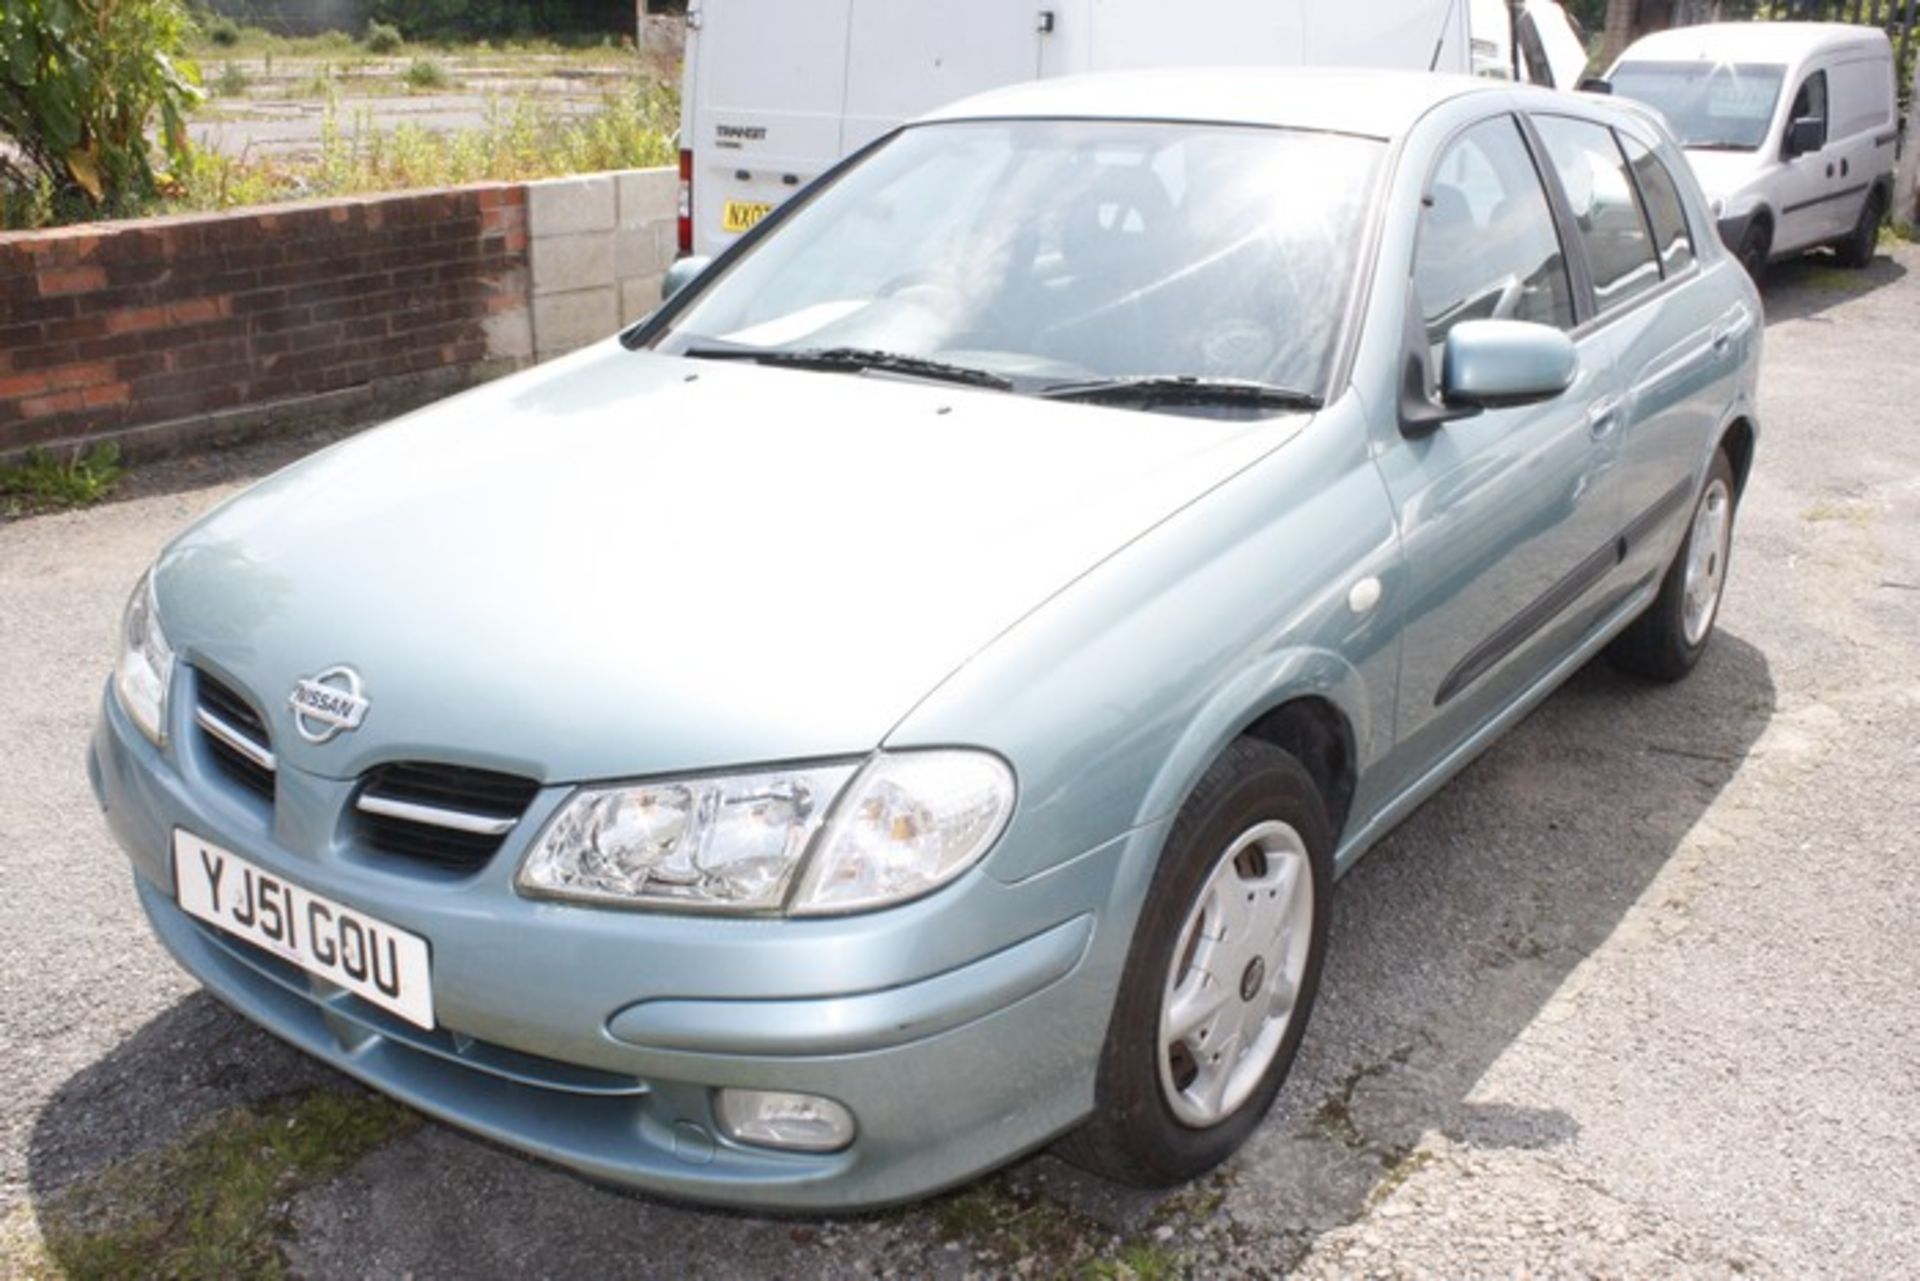 NISSAN ALMERA, YJ51 GOU, 1.5L, 57,600 MILES, SERVICE HISTORY, MOT DATE MARCH 2016, CENTRAL - Image 10 of 10